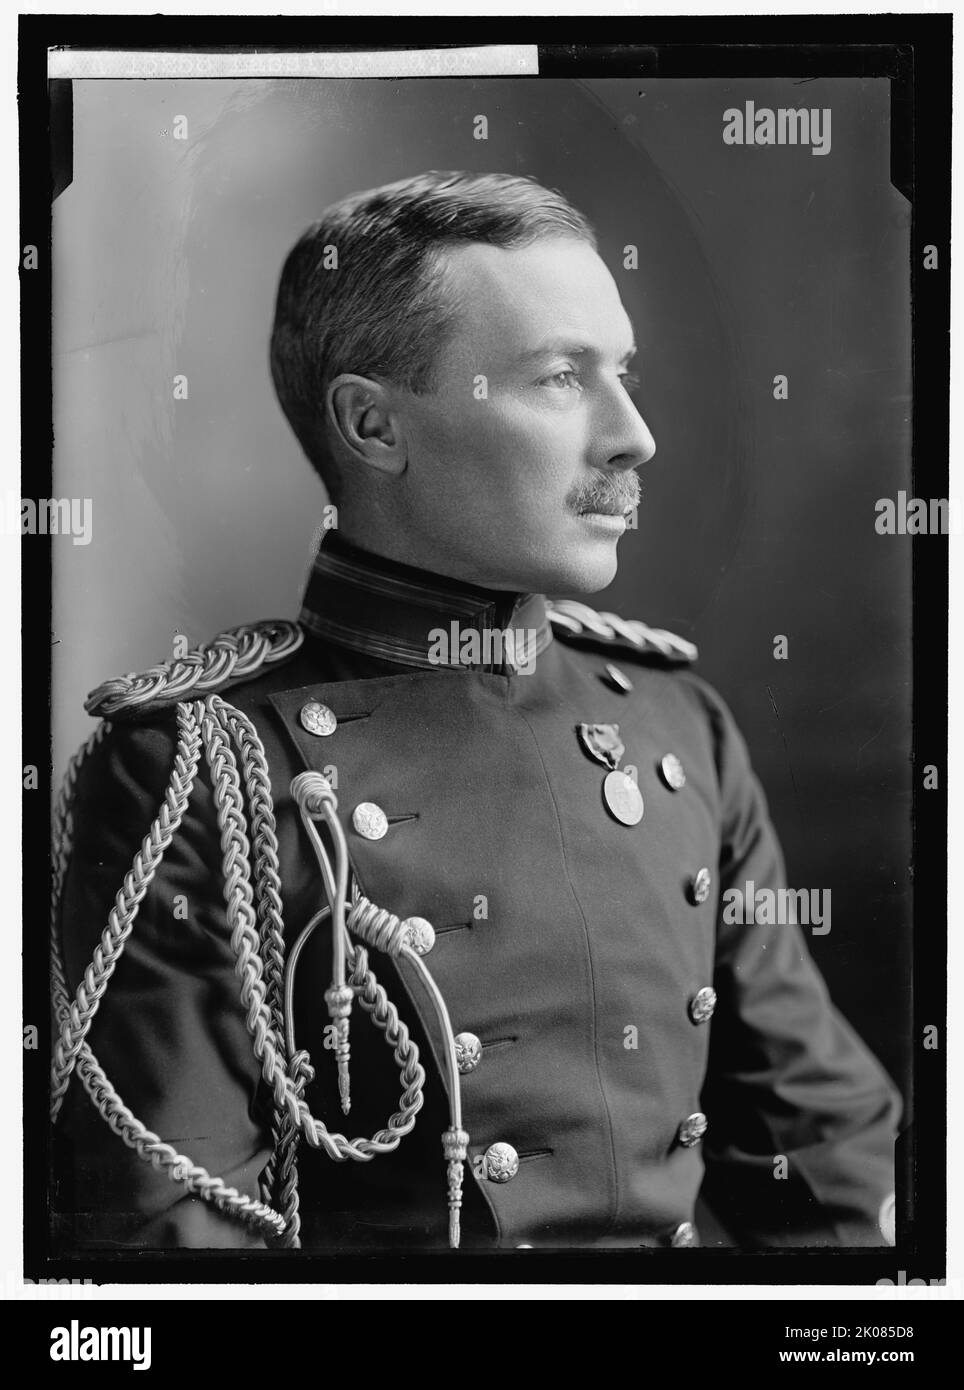 Major W. Lassiter, between 1913 and 1918. US Army officer William Lassiter fought in the Spanish-American War, Occupation of Veracruz, World War I, and the Occupation of the Rhineland. Stock Photo